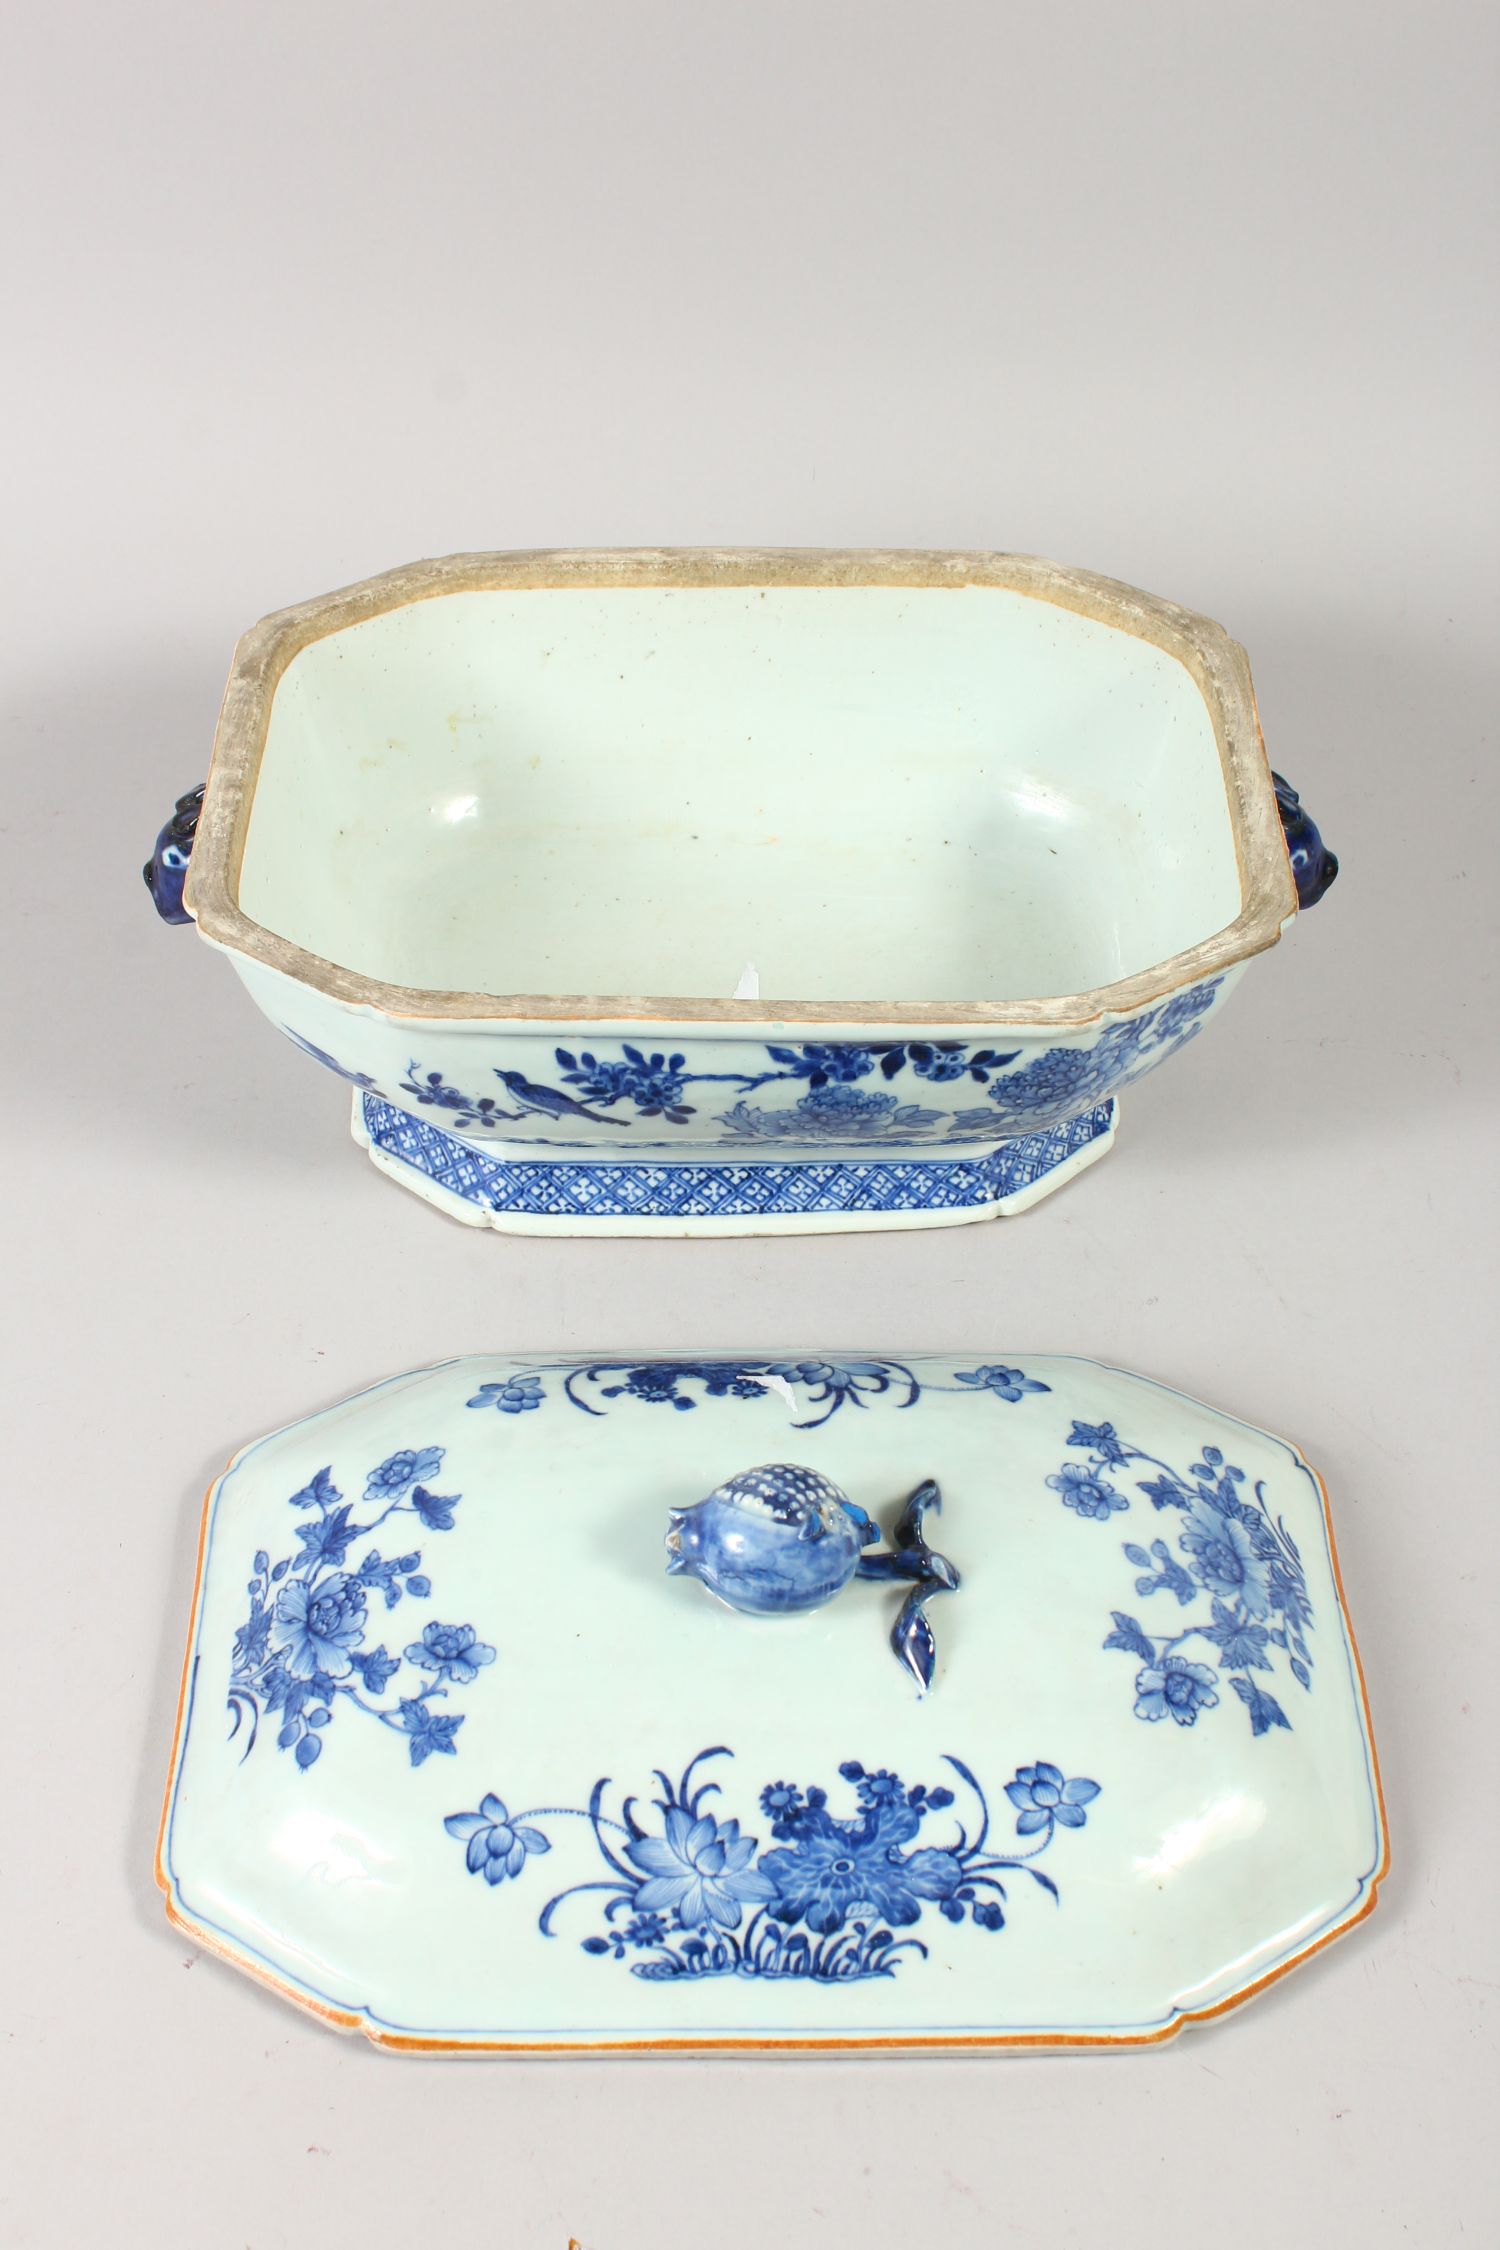 AN 18TH CENTURY CHINESE QIANLONG PERIOD BLUE & WHITE PORCELAIN TUREEN & COVER, of chamfered - Image 5 of 6